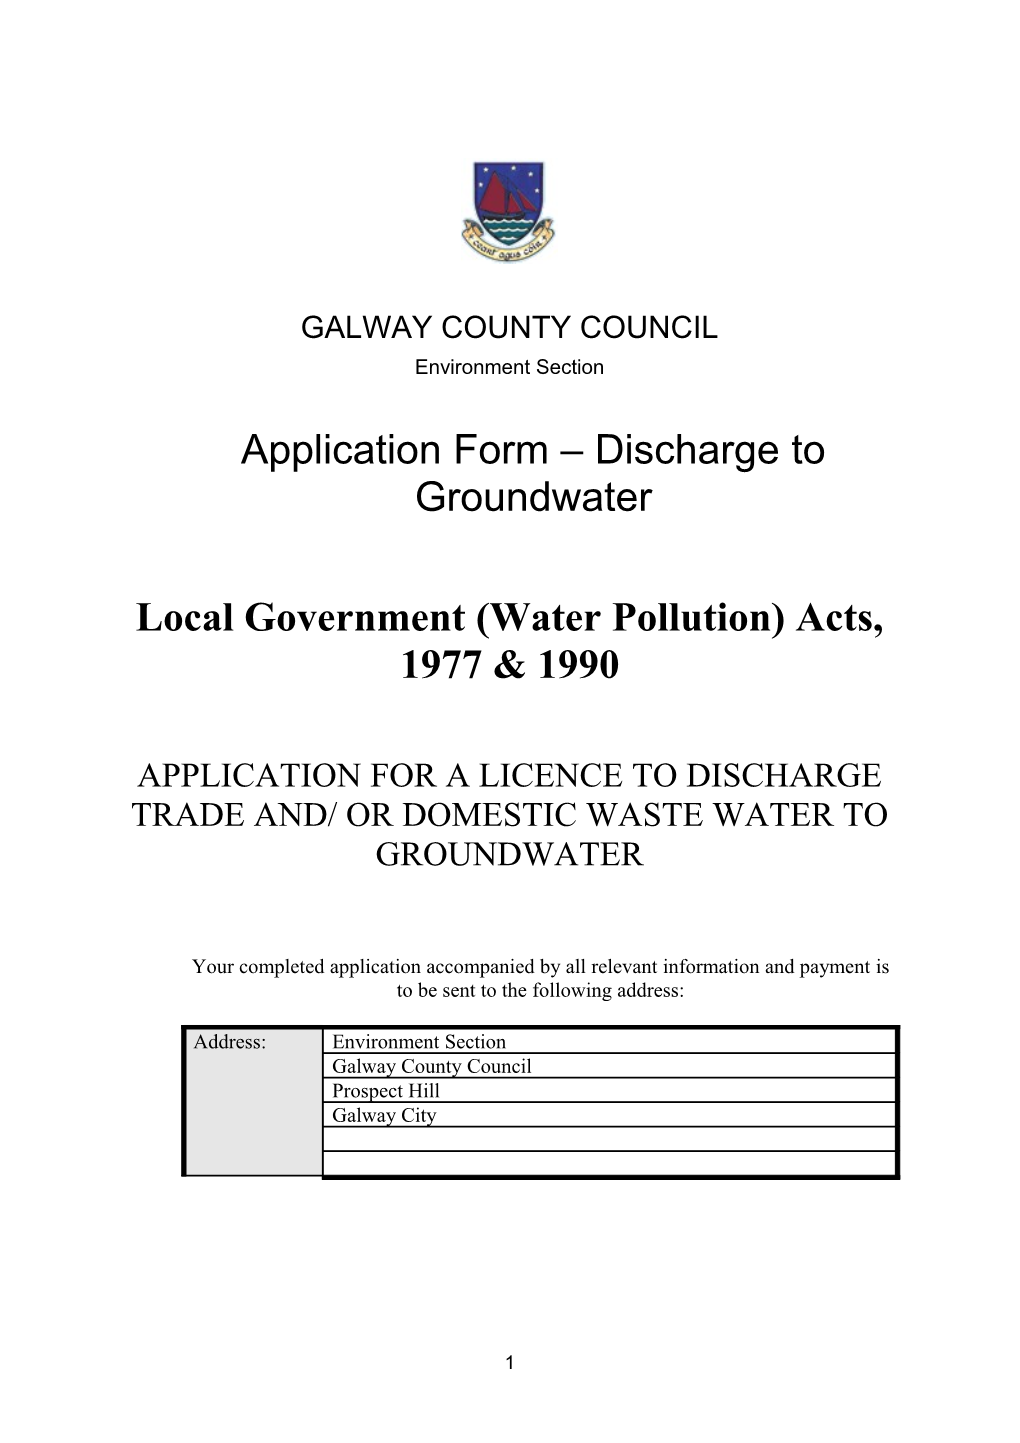 Application Form Discharge to Groundwater